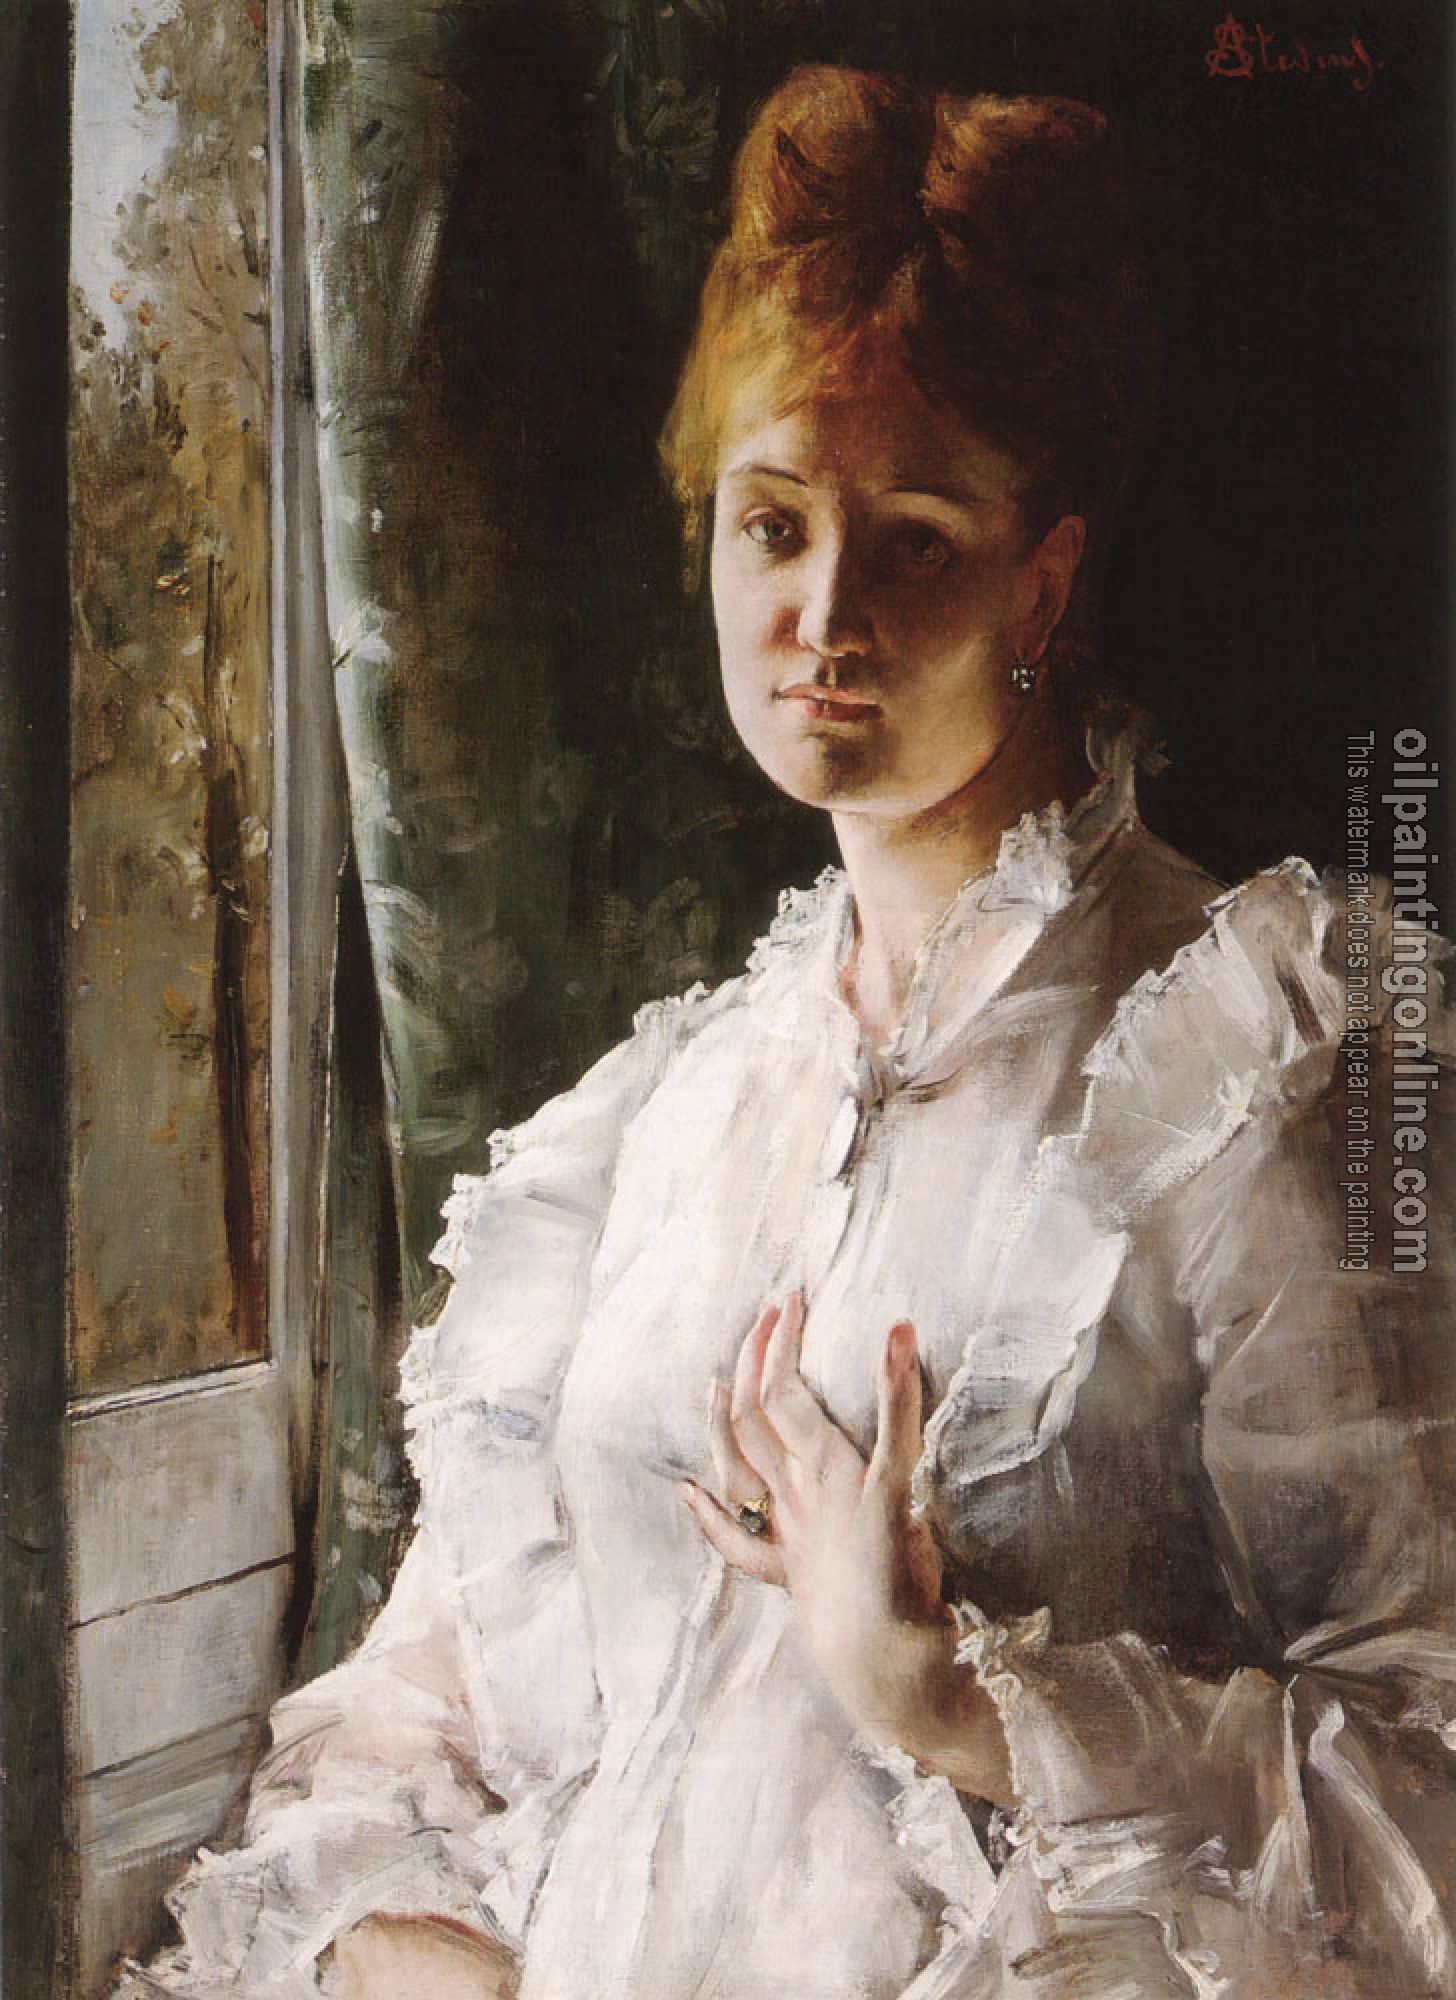 Stevens, Alfred - Portrait of a Woman in White